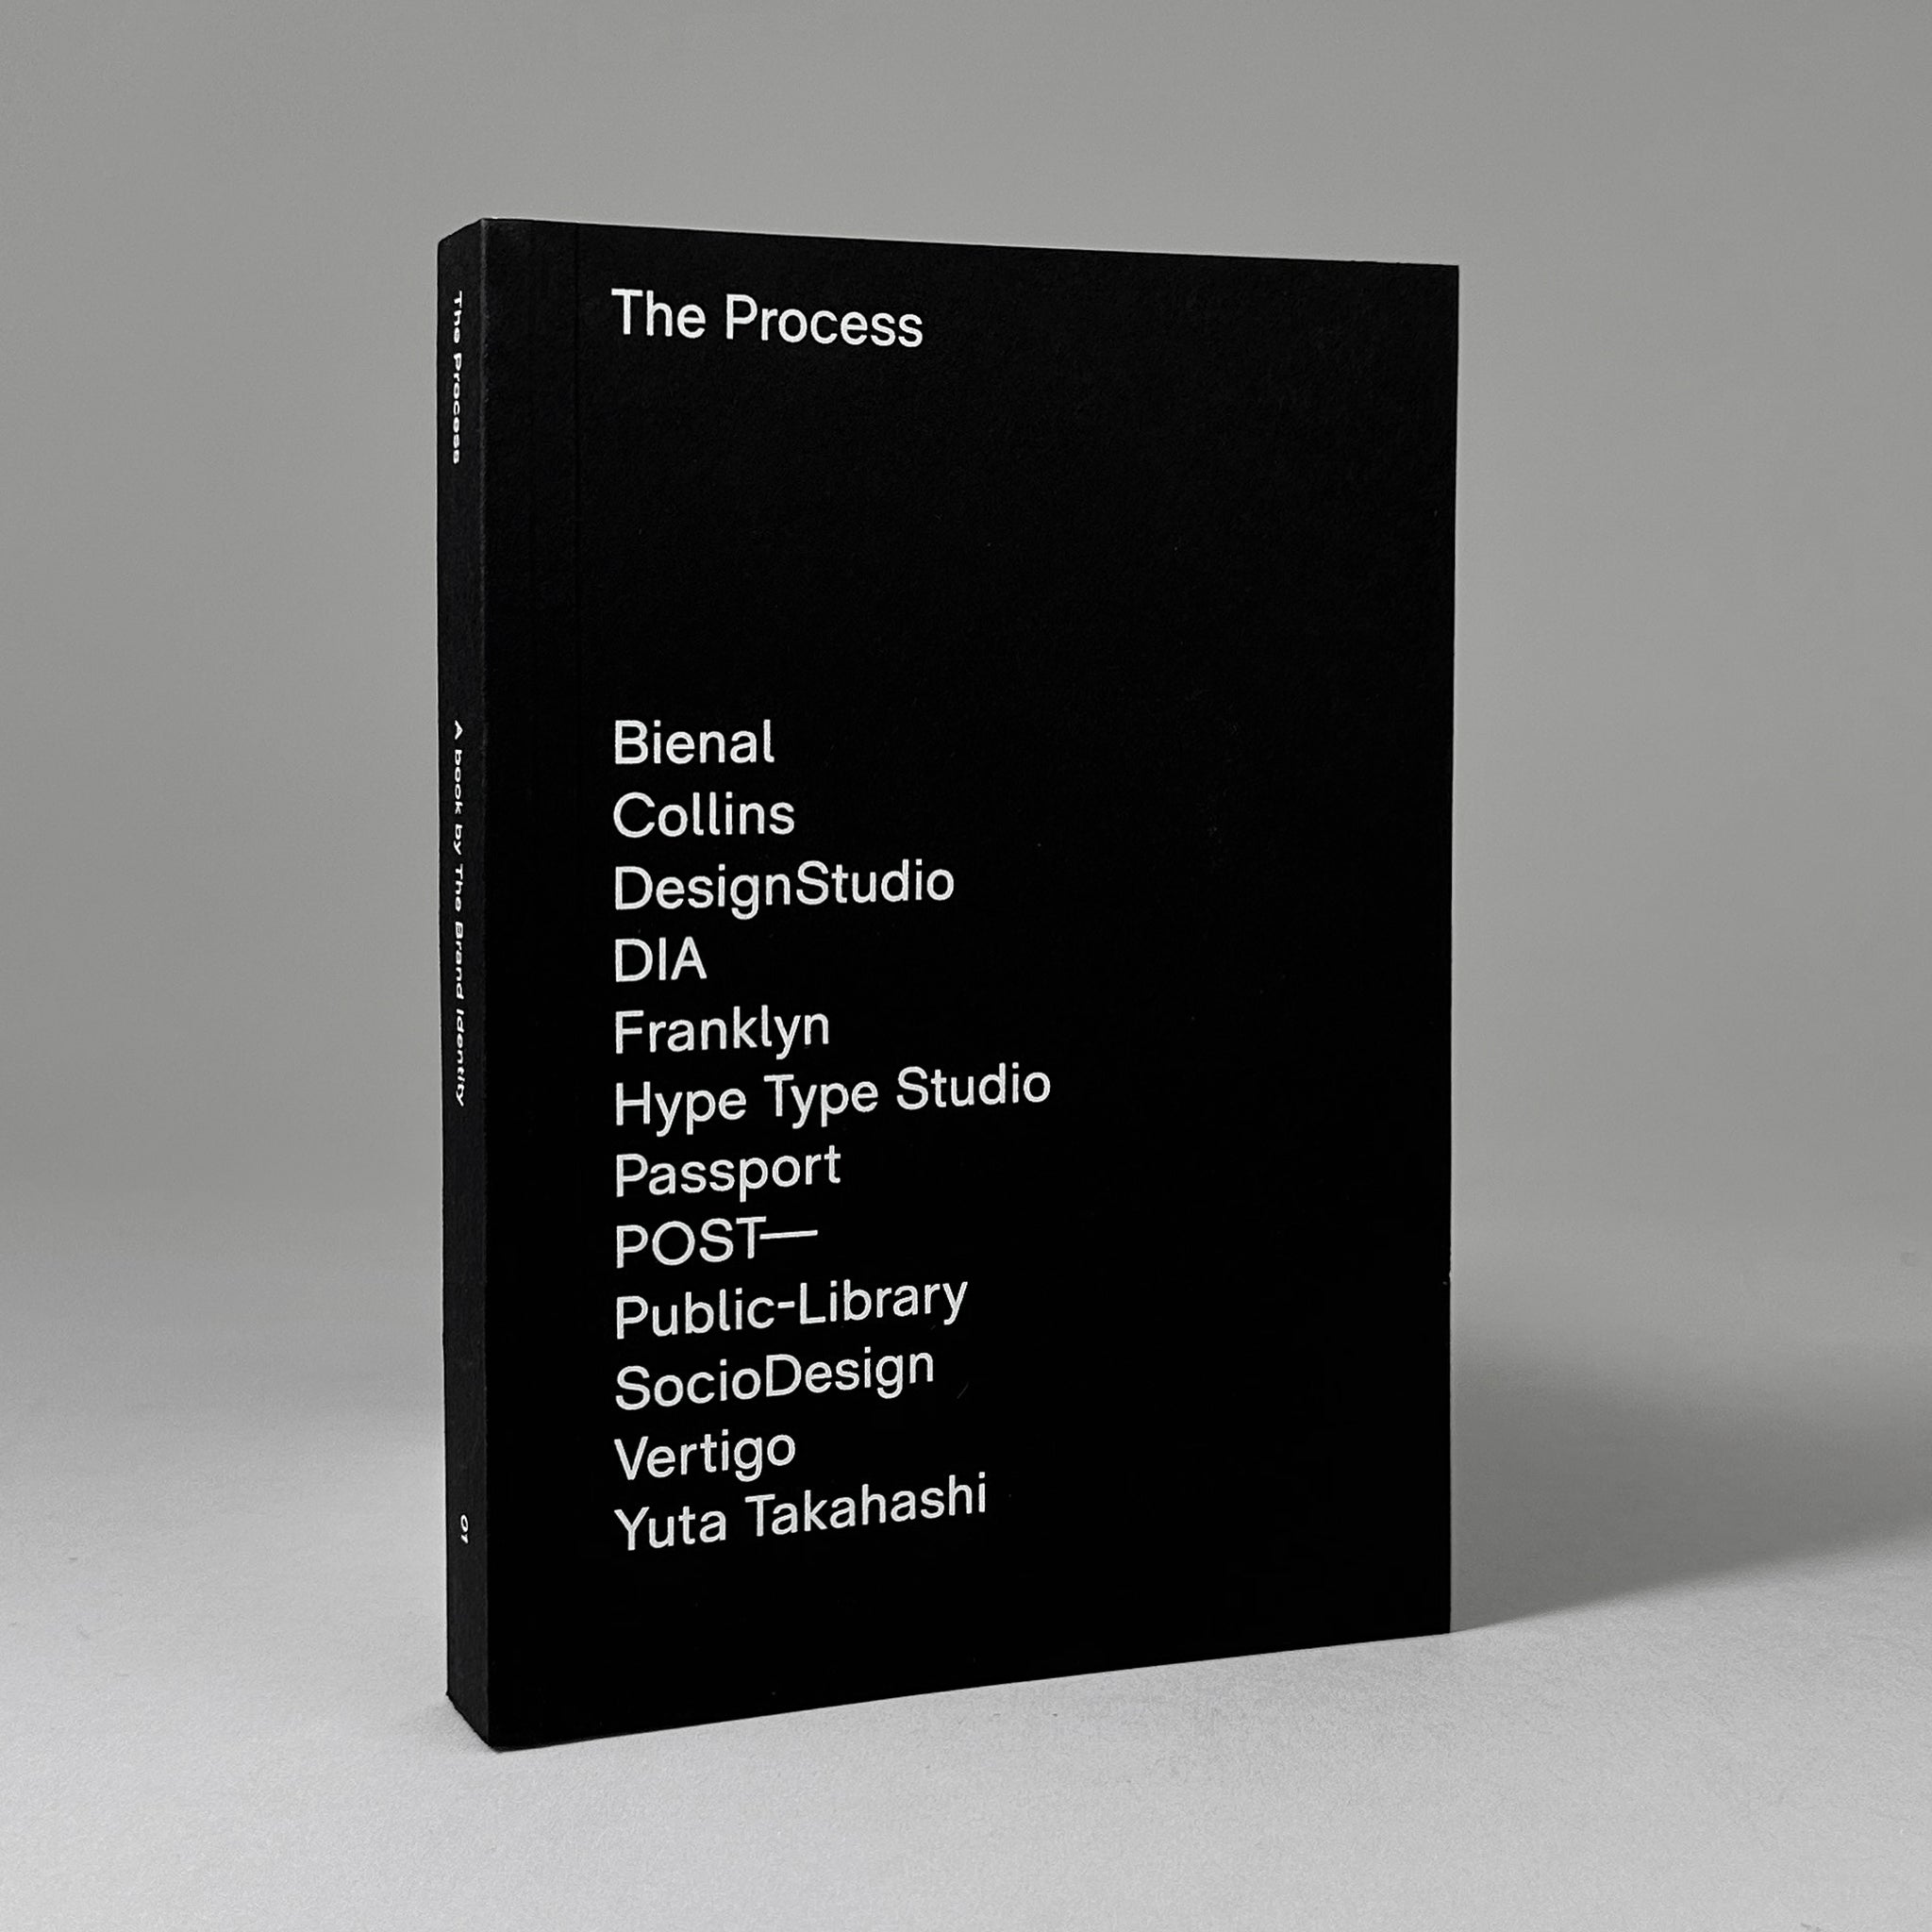 The Process (from The Brand Identity)